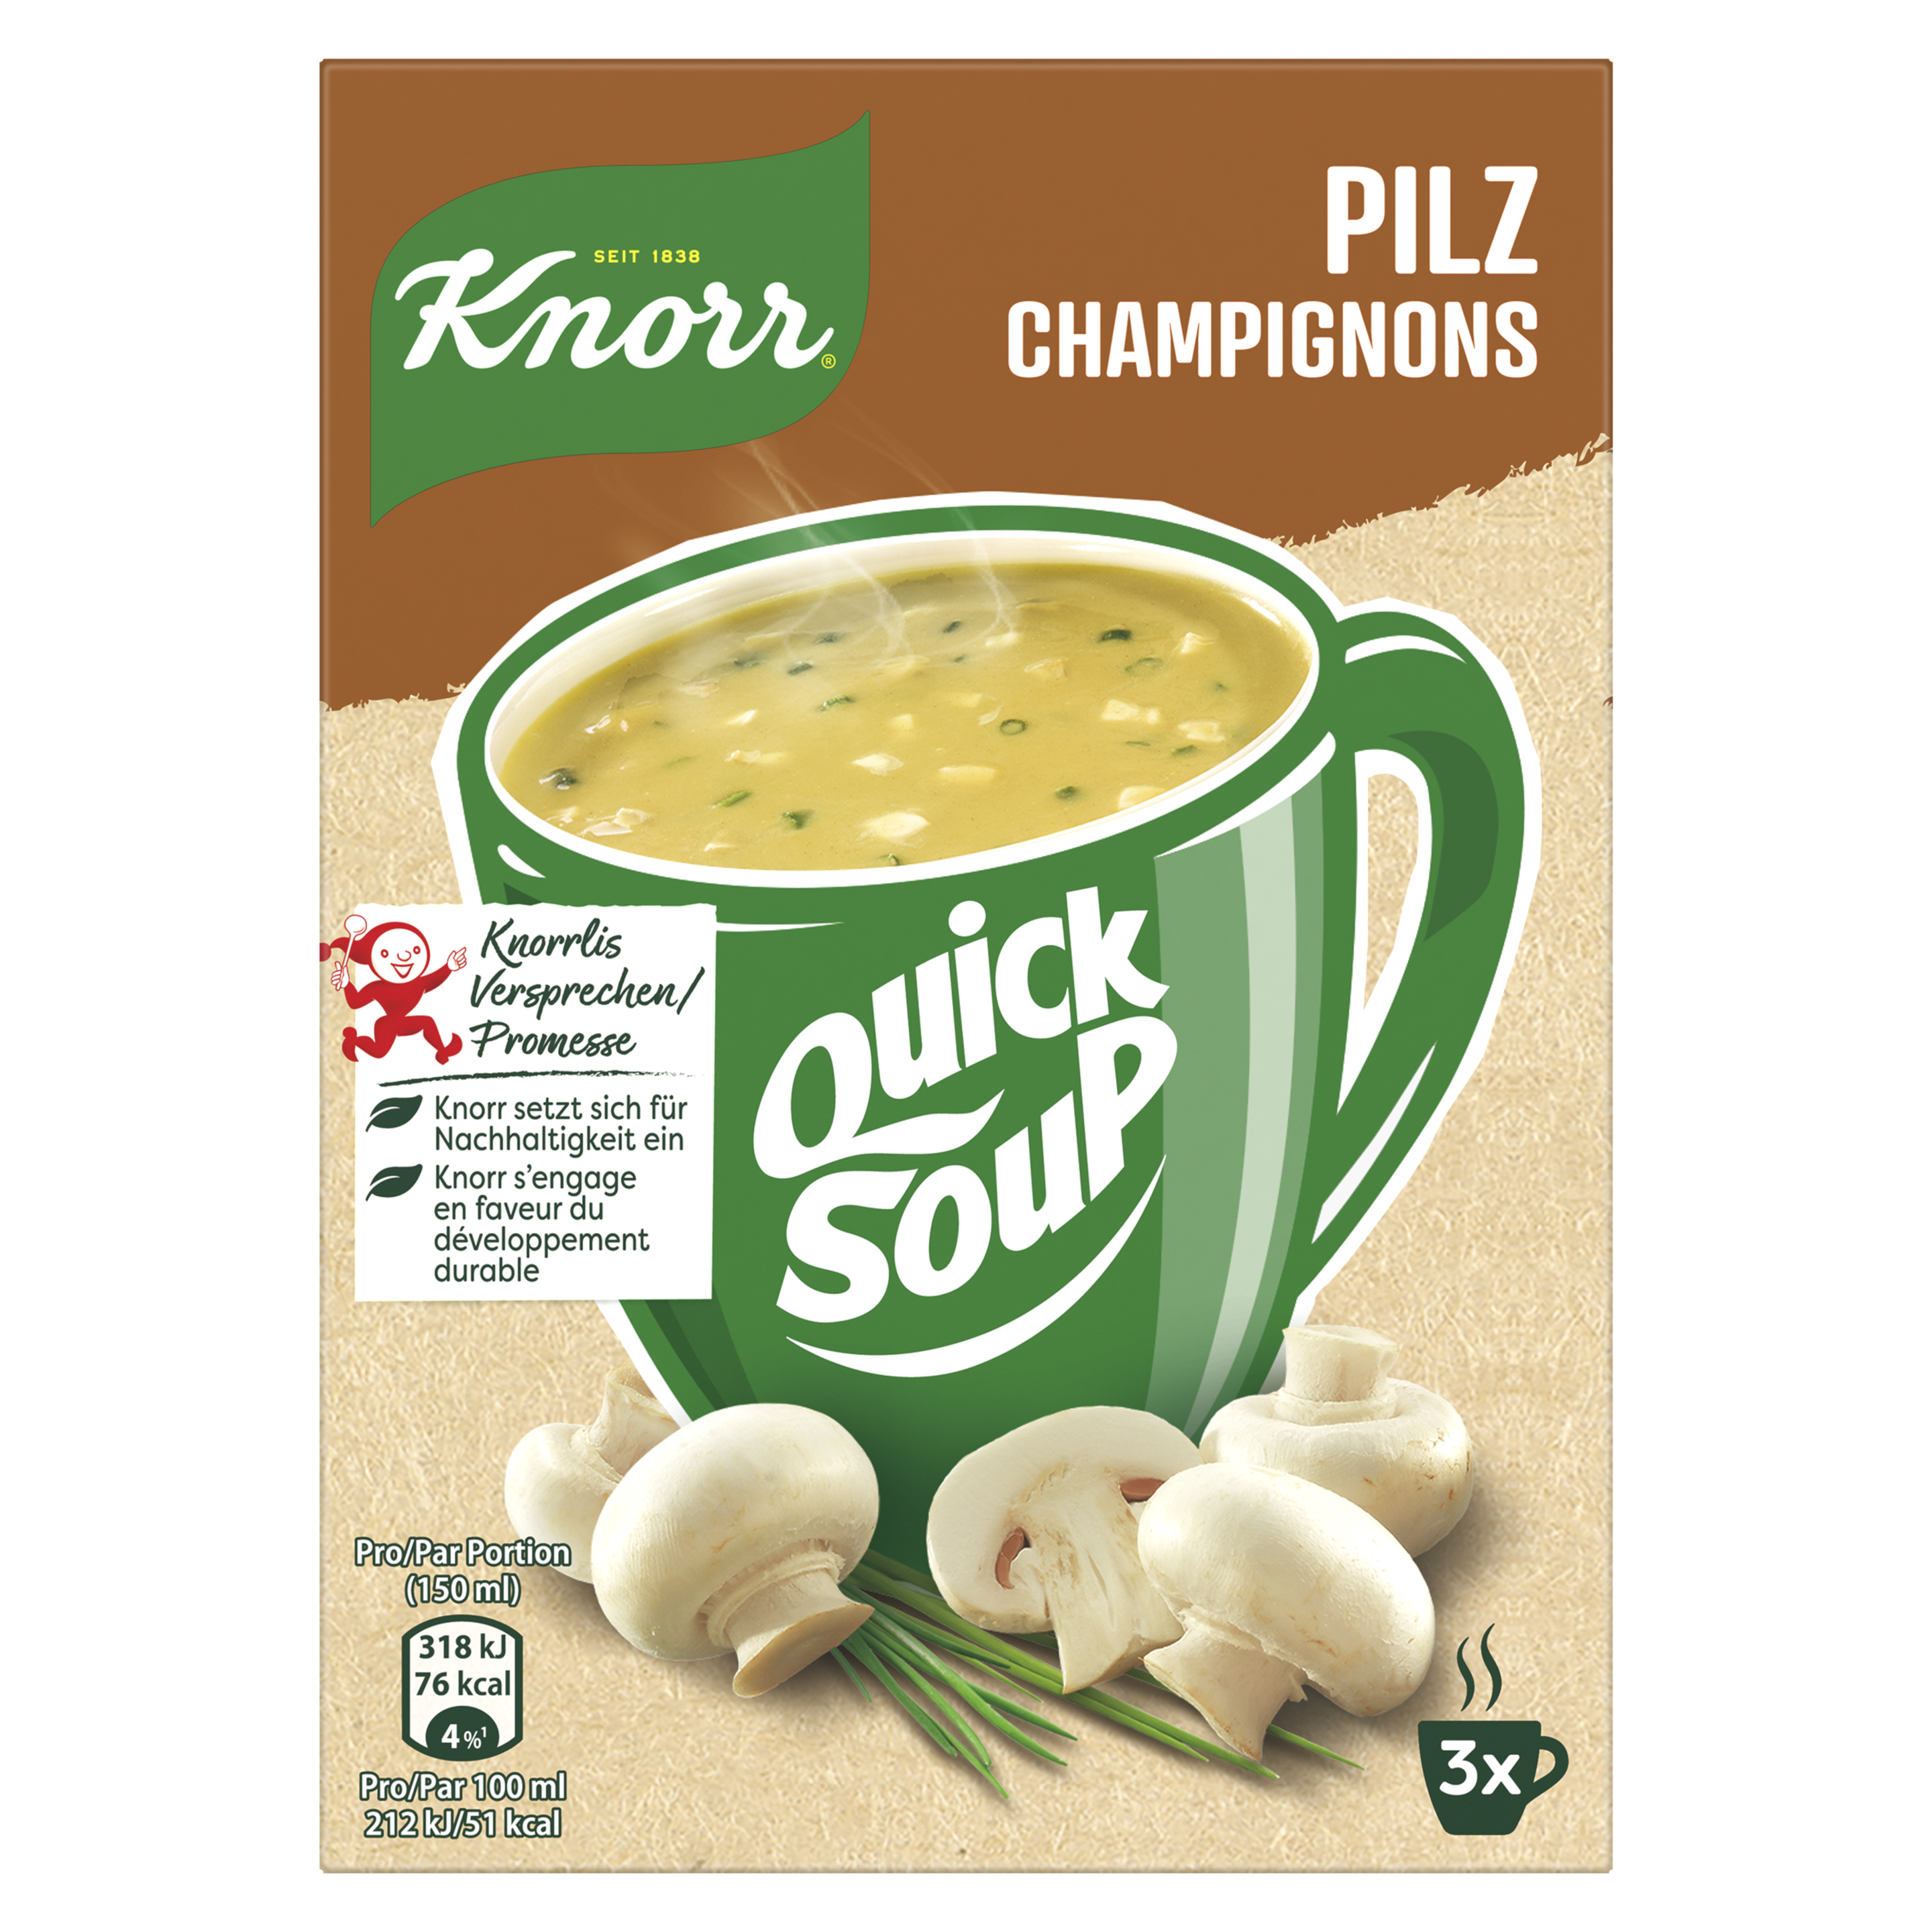 KNORR Quick soup Champignons emballage 3 x 1 portion